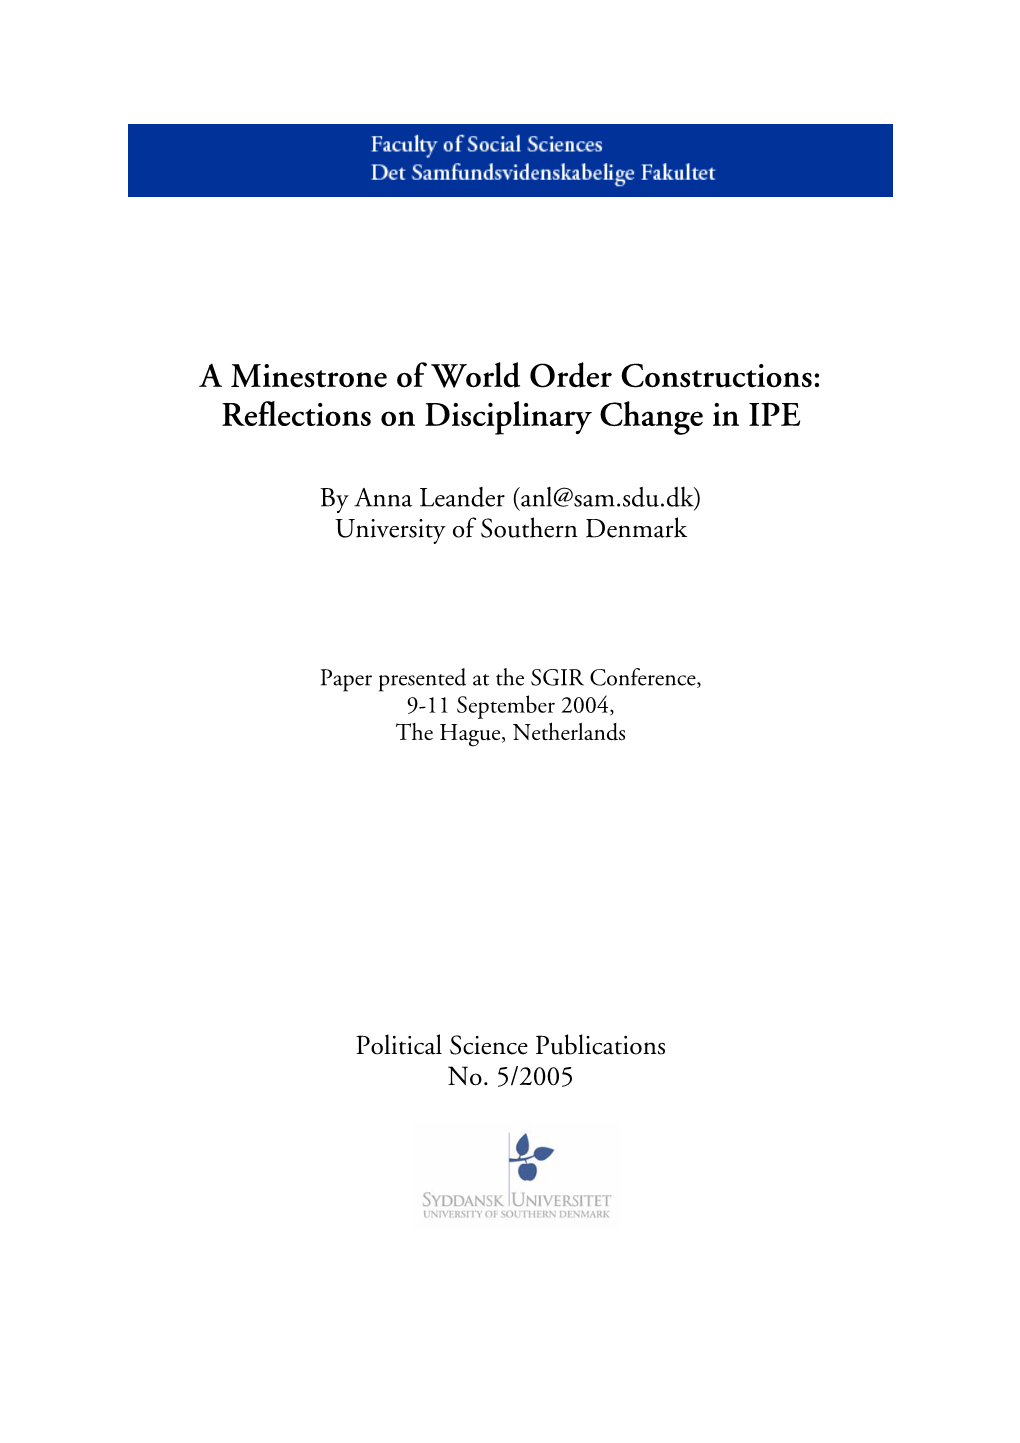 Reflections on Disciplinary Change in IPE